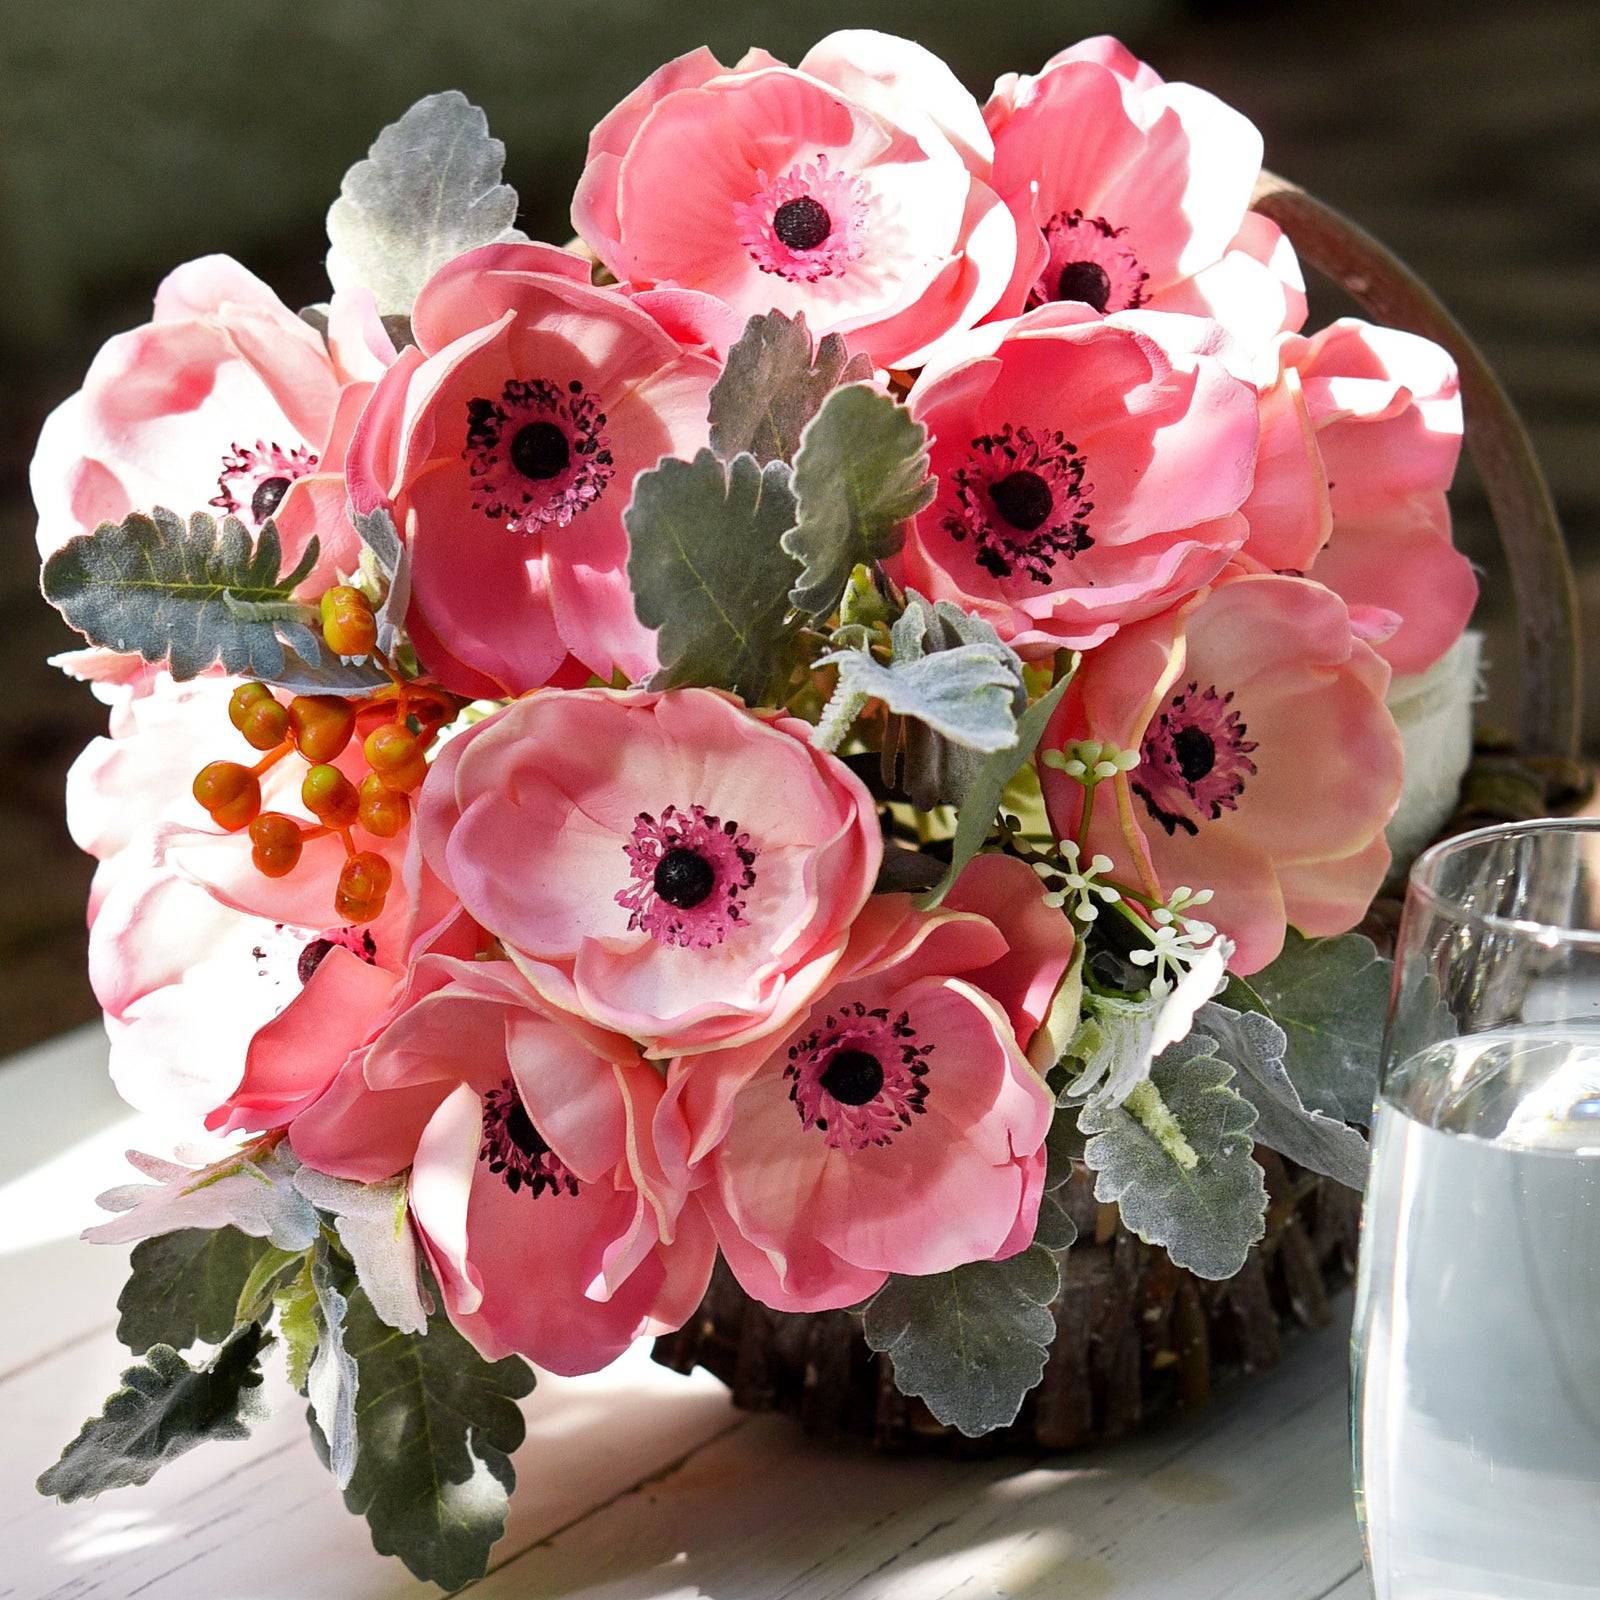 12 Long Stems of ‘Real Touch’ Artificial (Pink) Anemone Flowers, Wedding Bouquet Flower Arrangement, 45cm (17.7 inches)